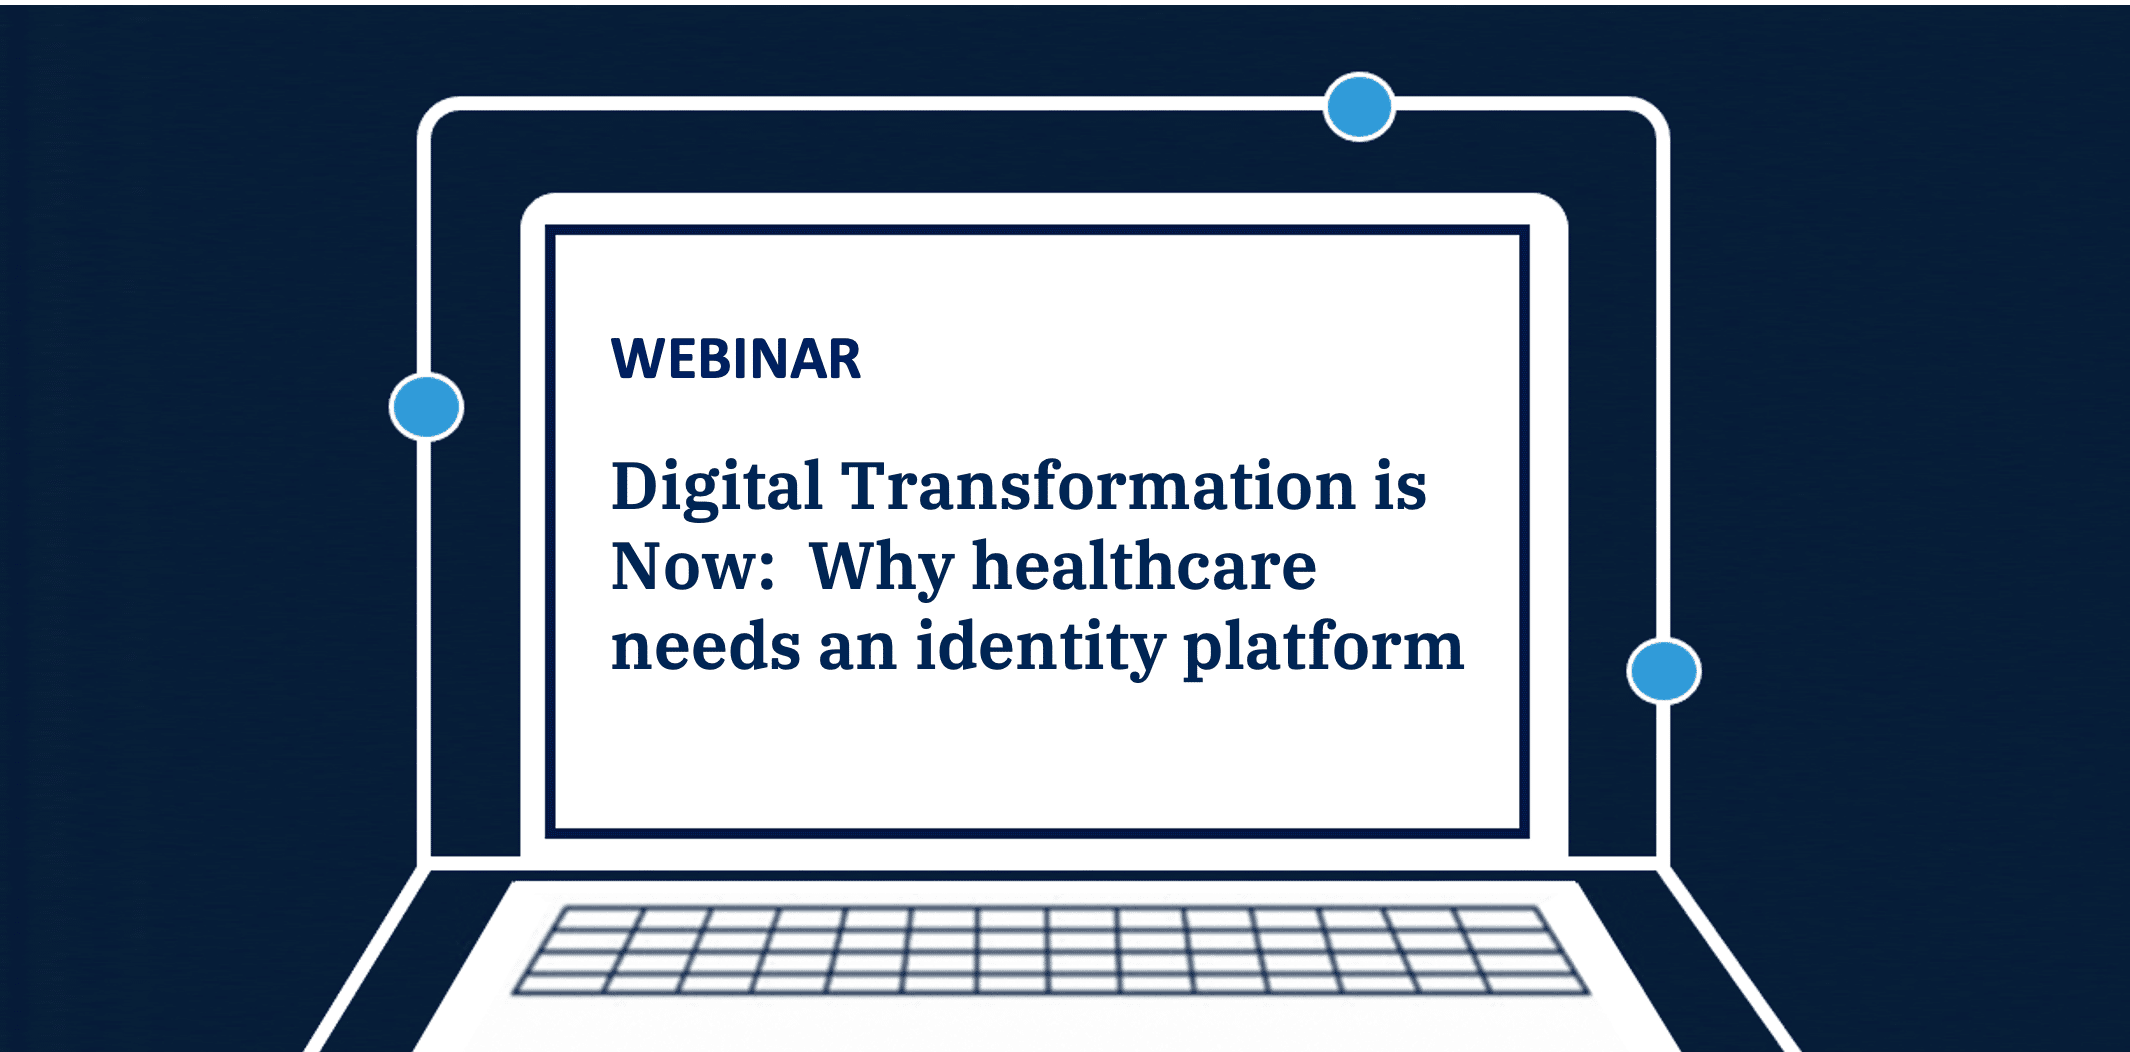 Digital Transformation is Now: Why healthcare needs an identity platform